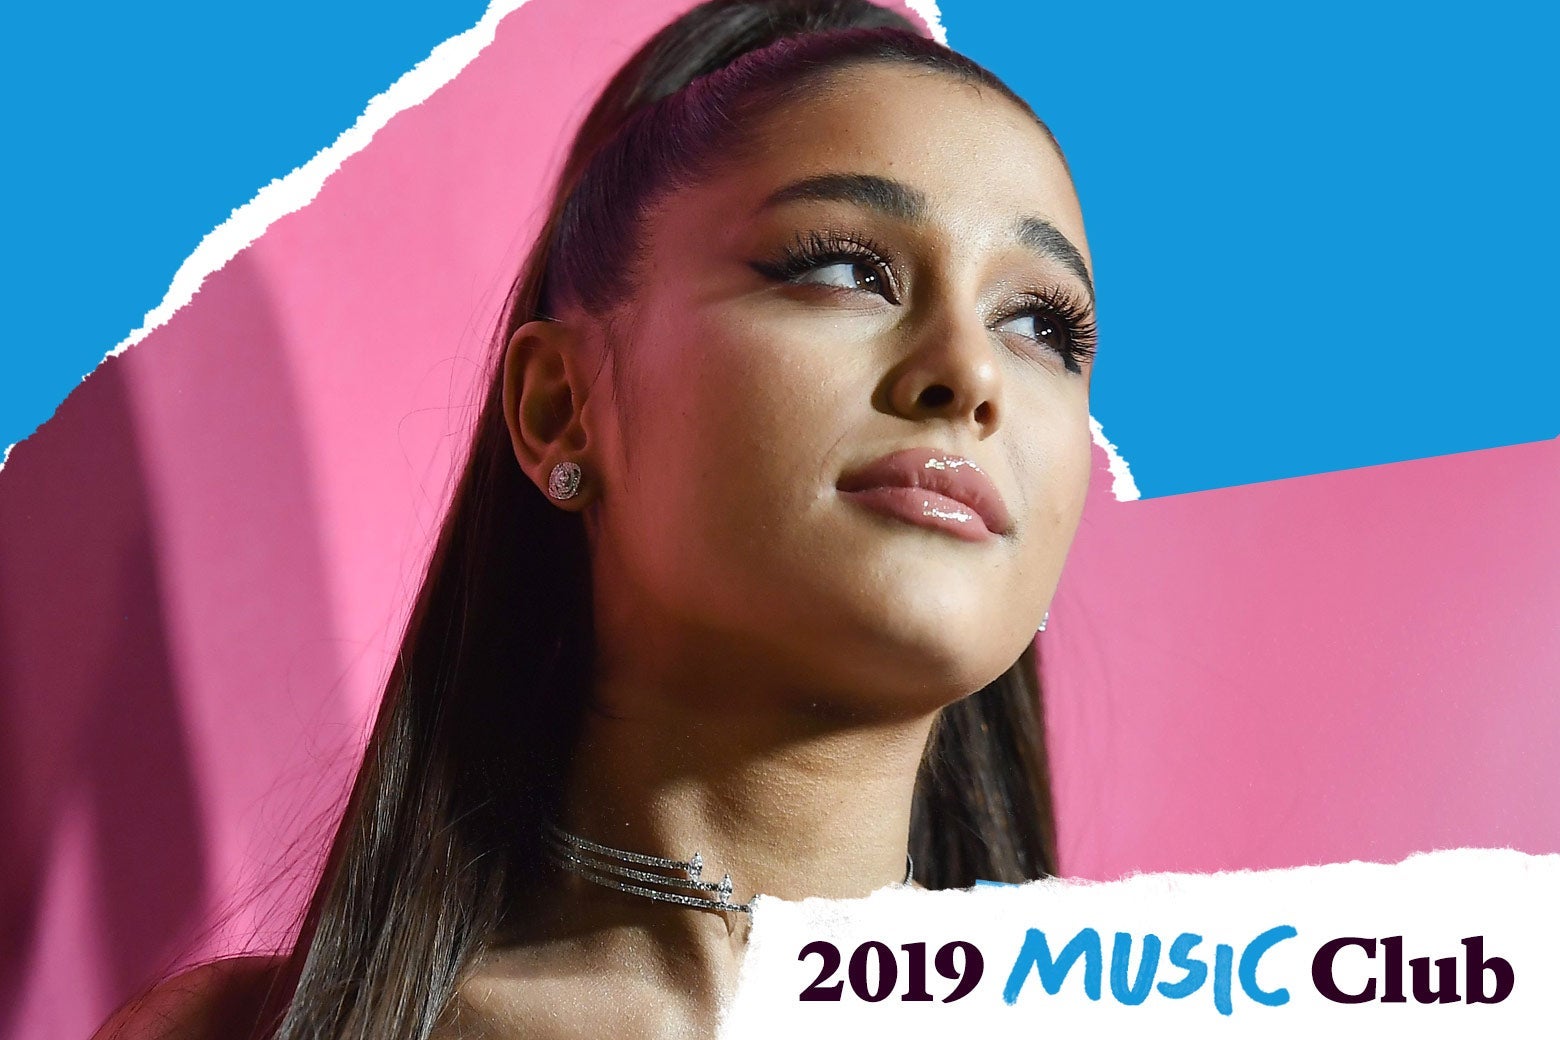 Ariana Grande with her head cocked to the side. Text in the corner reads "2019 Music Club."